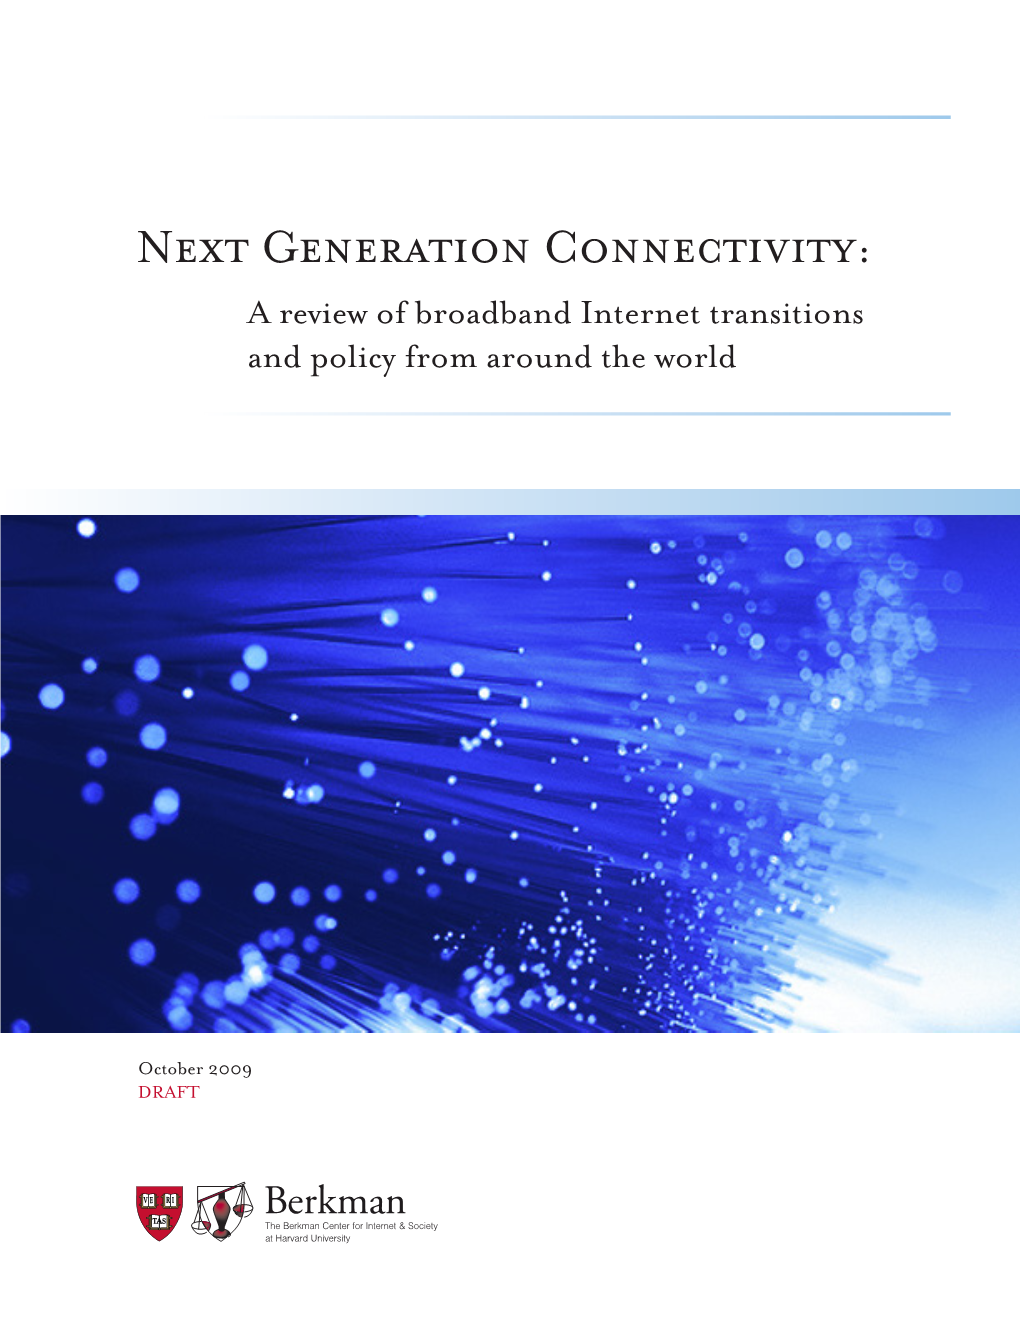 Next Generation Connectivity: a Review of Broadband Internet Transitions and Policy from Around the World